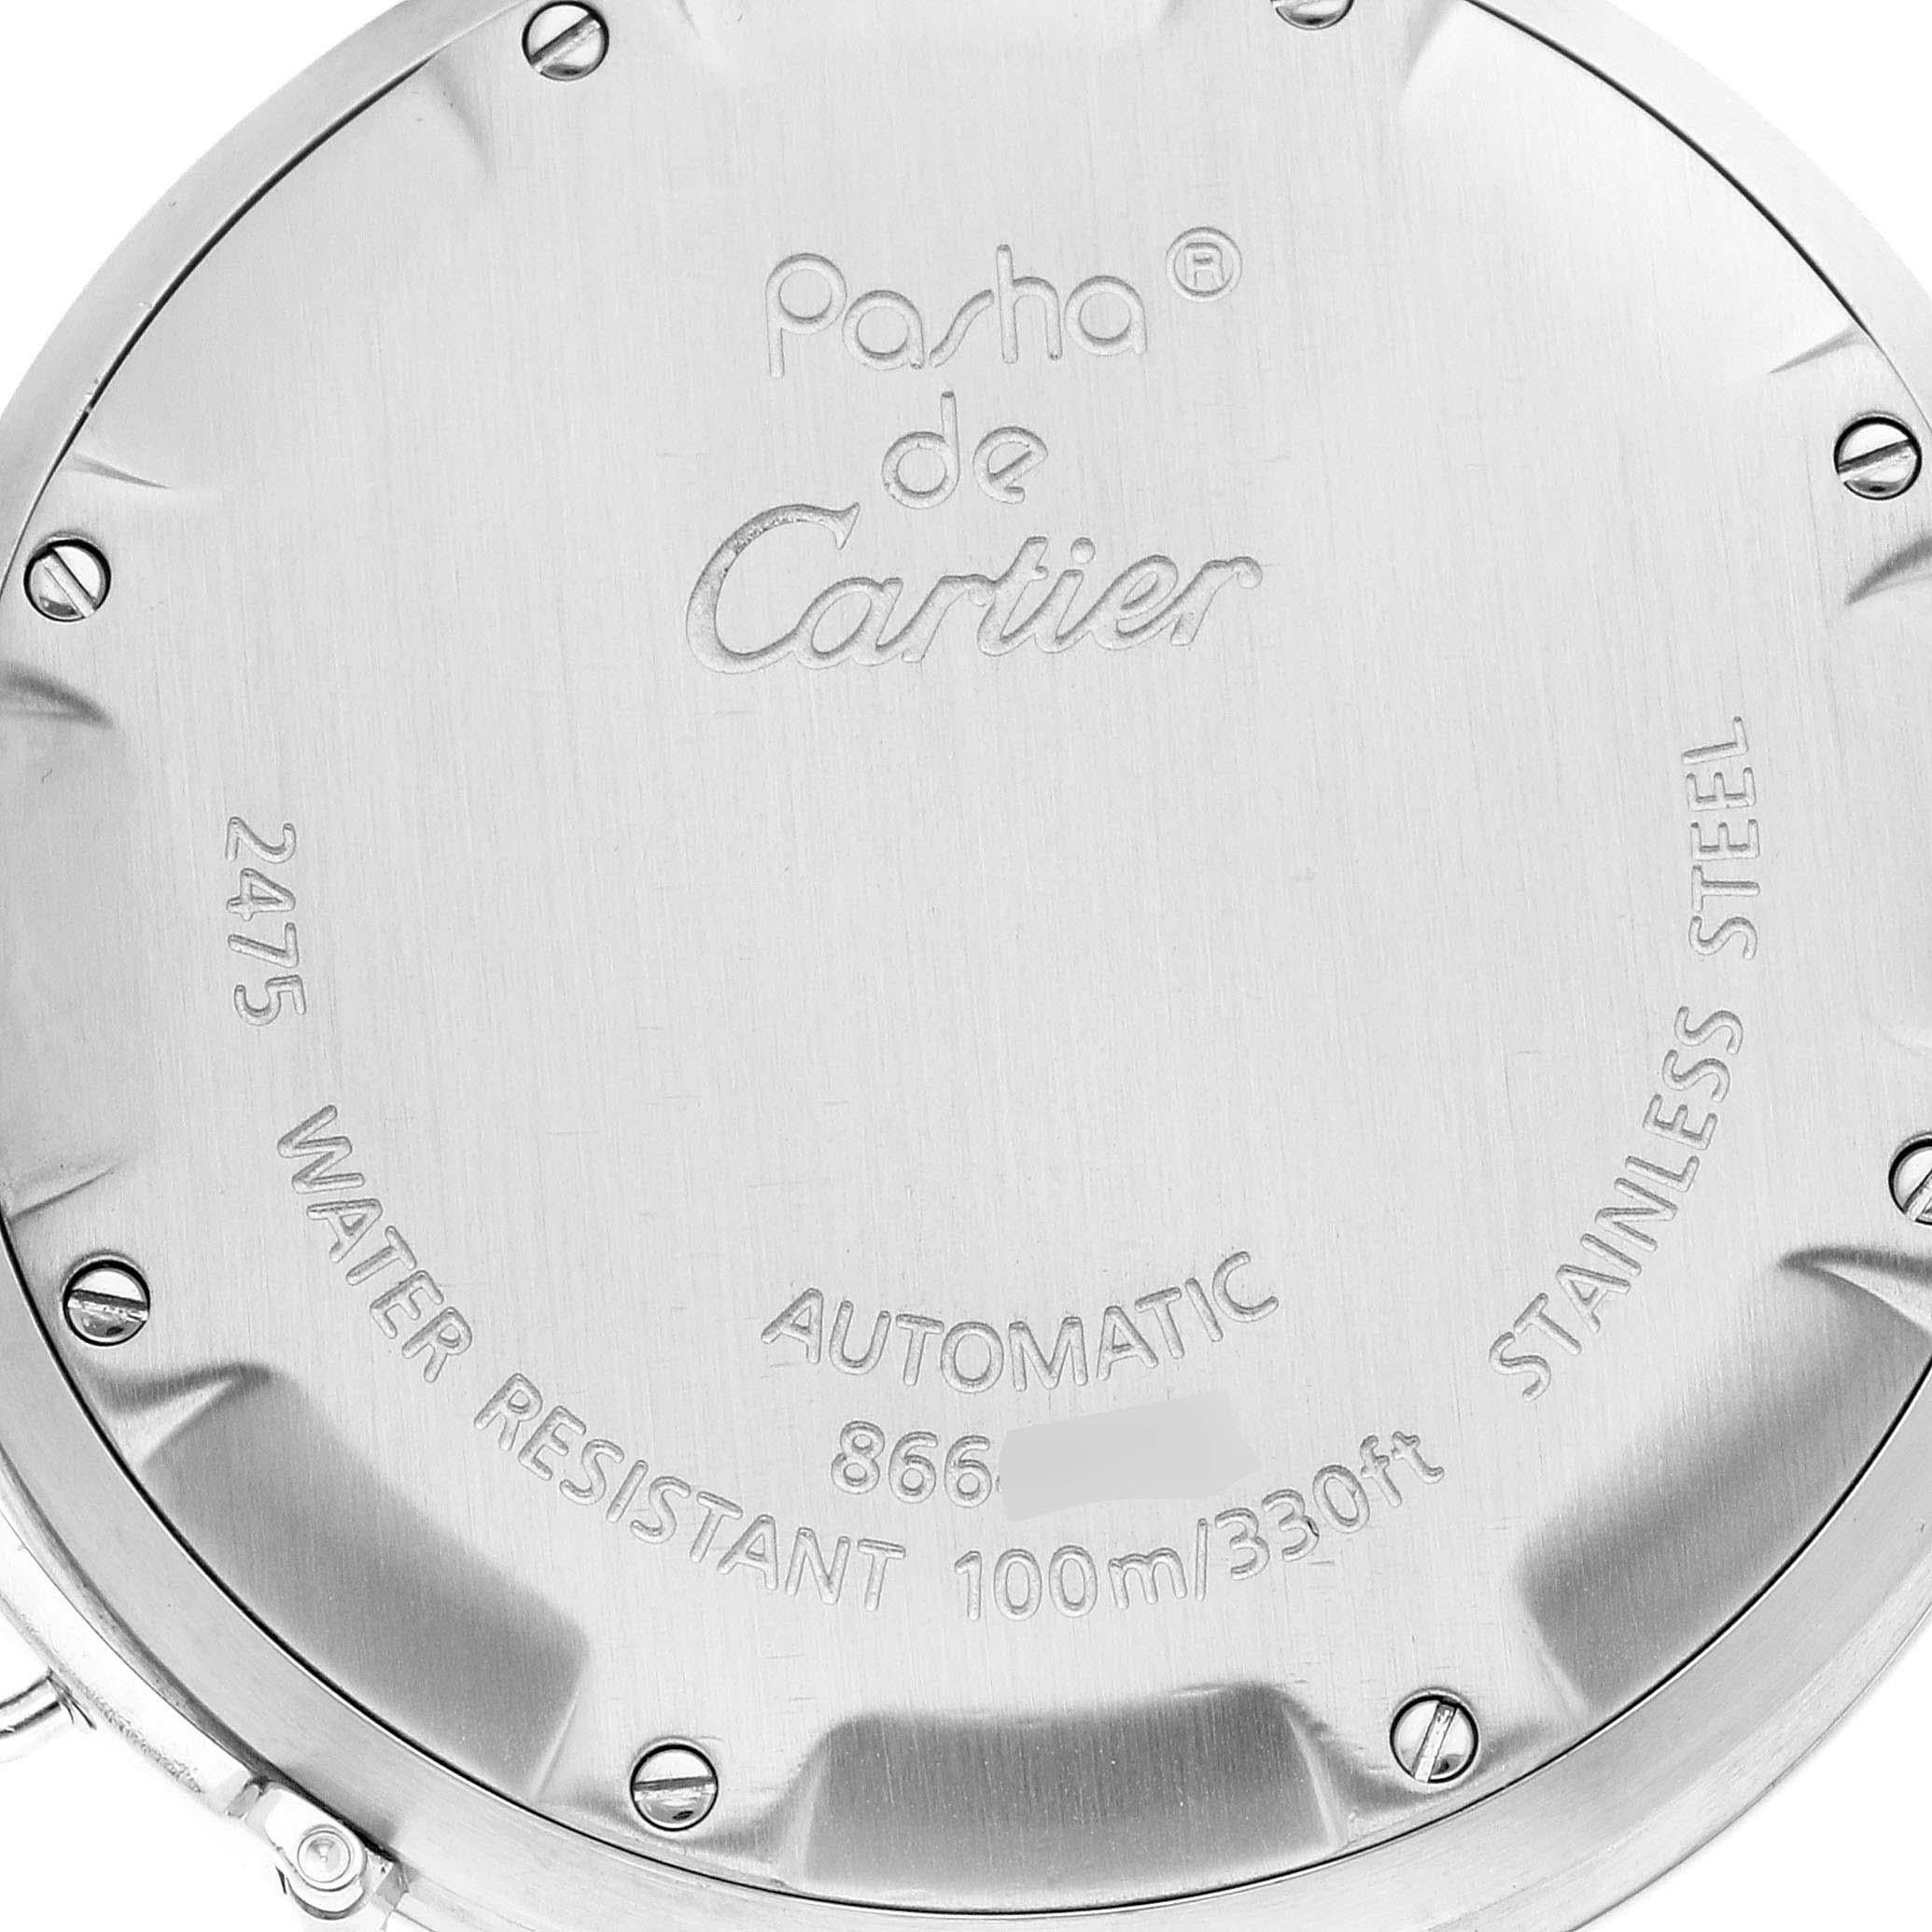 Cartier Pasha C Midsize Big Date White Dial Steel Mens Watch W31044M7 For Sale 2